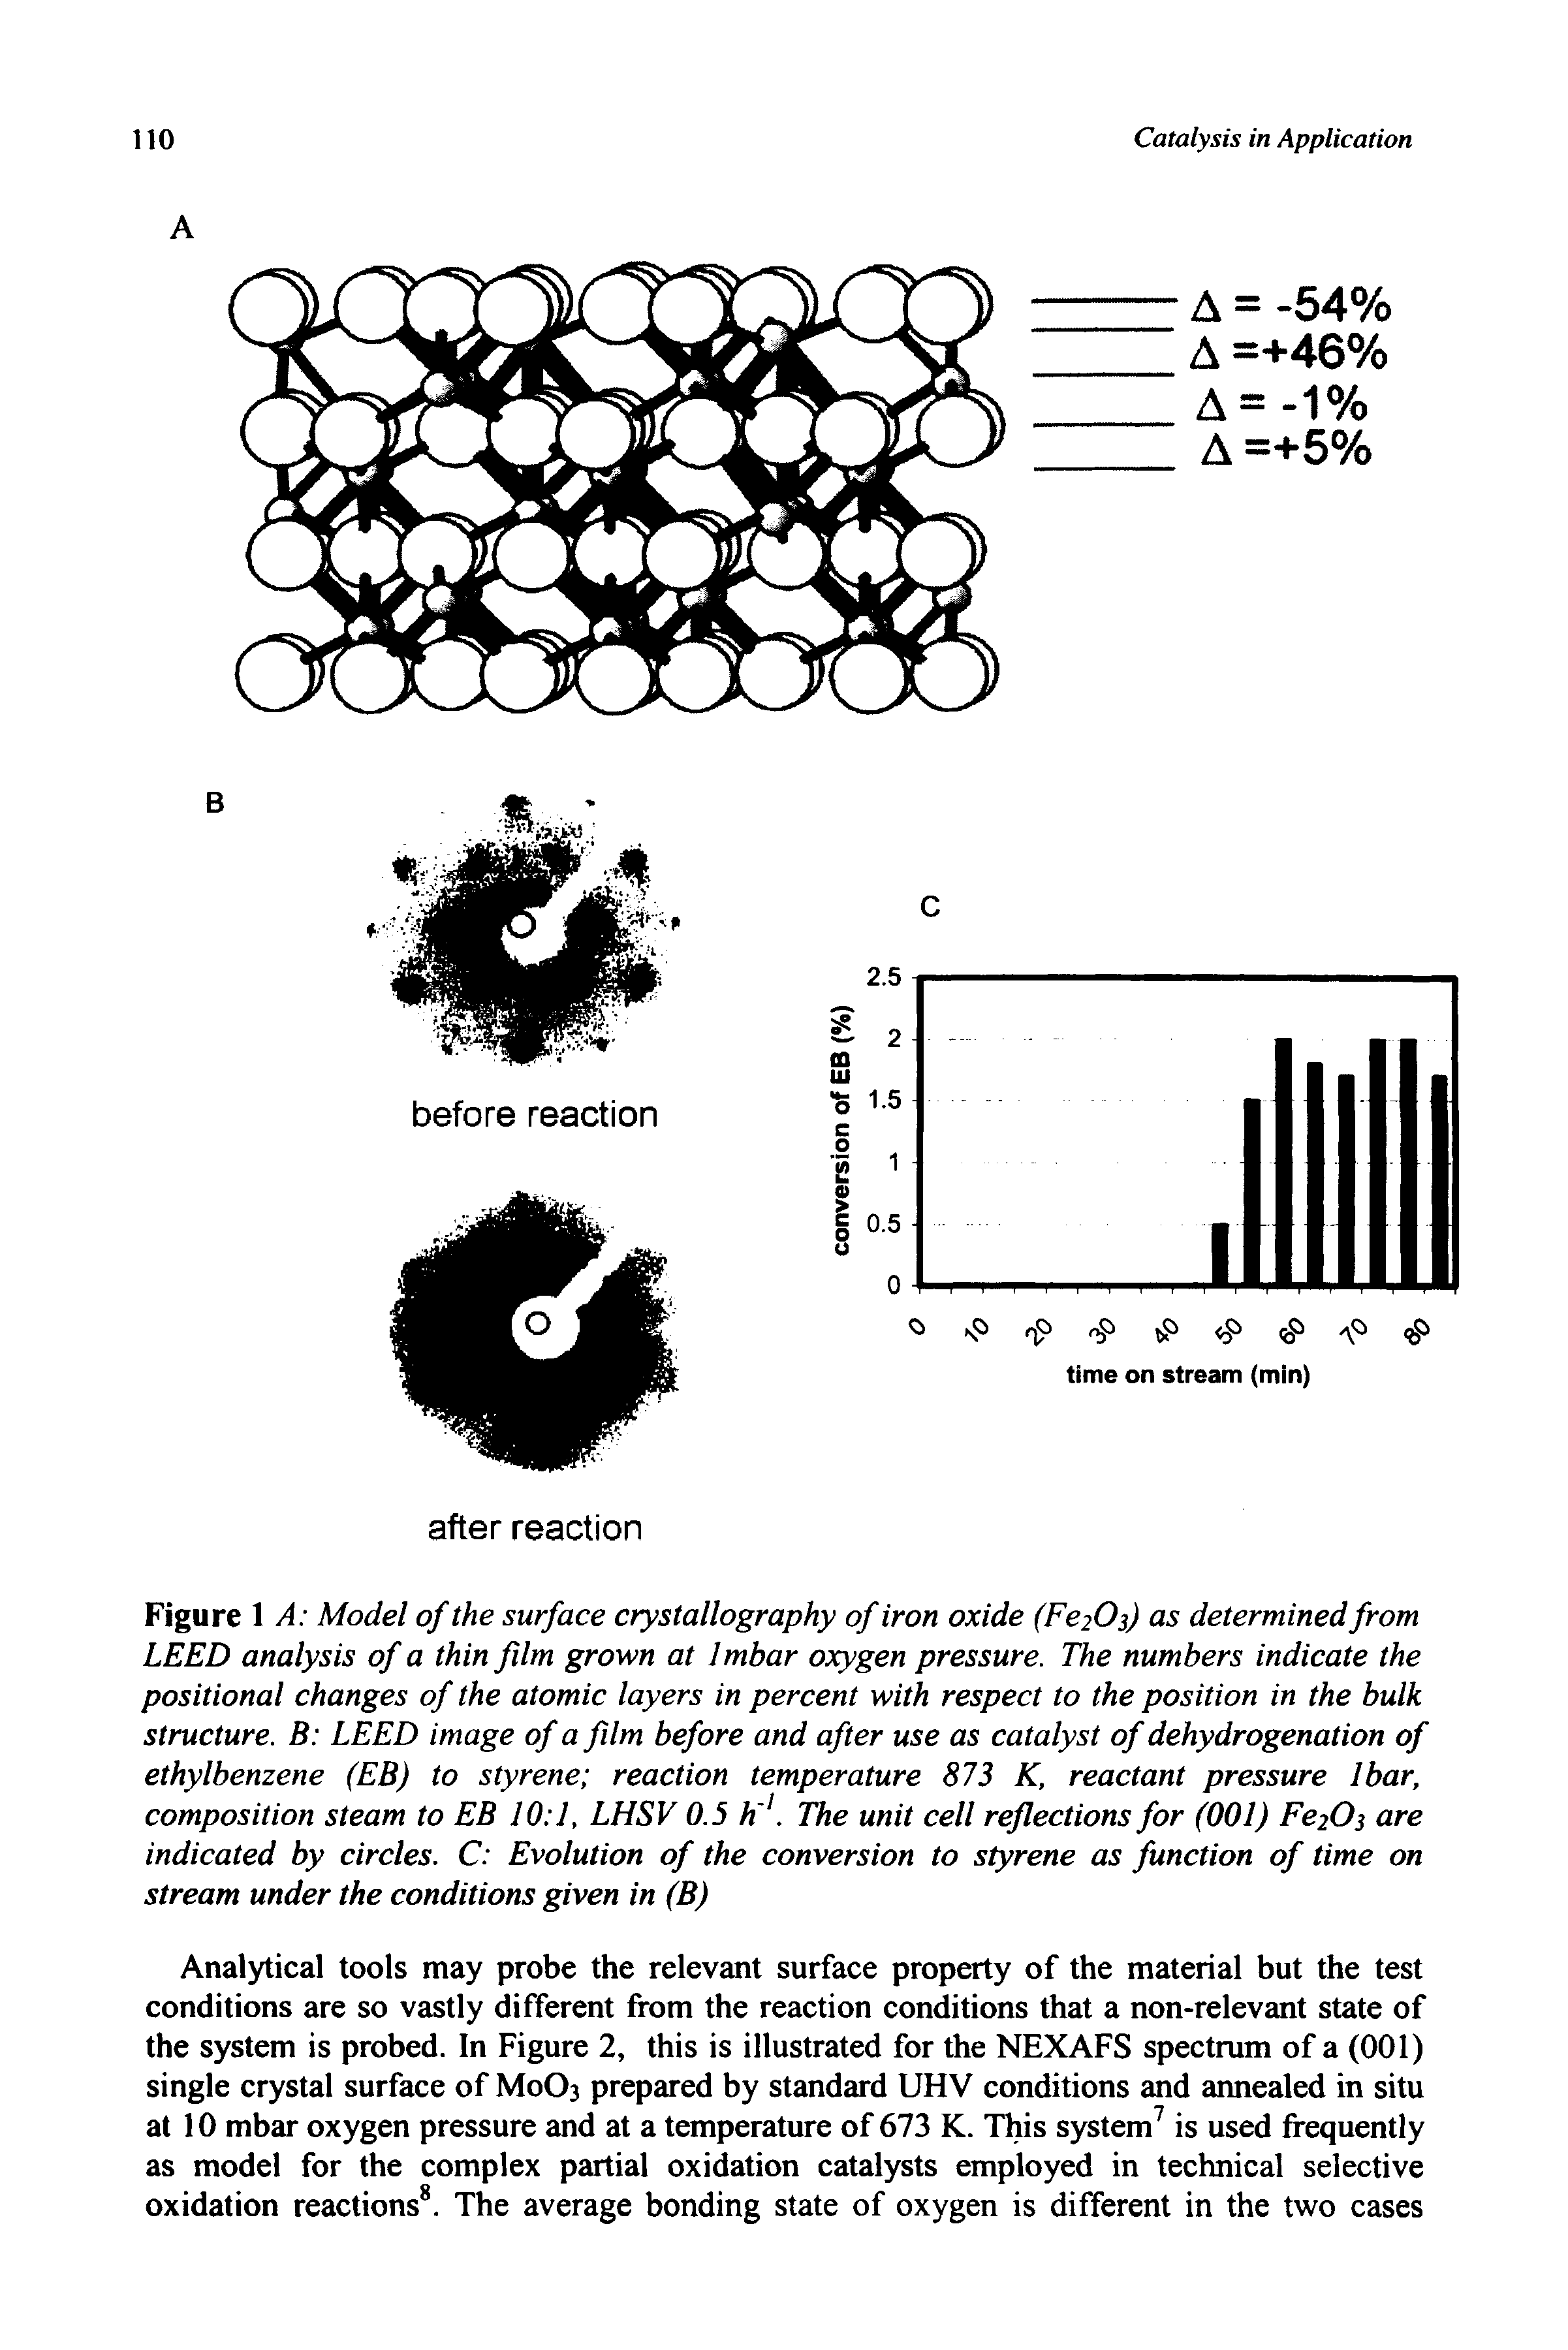 Figure 1 A Model of the surface crystallography of iron oxide (Fe20s) as determined from LEED analysis of a thin fdm grown at Imbar oxygen pressure. The numbers indicate the positional changes of the atomic layers in percent with respect to the position in the bulk structure. B LEED image of a film before and after use as catalyst of dehydrogenation of ethylbenzene (EB) to styrene reaction temperature 873 K, reactant pressure Ibar, composition steam to EB 10 1, LHSV 0.5 h. The unit cell reflections for (001) Fe20s are indicated by circles. C Evolution of the conversion to styrene as function of time on stream under the conditions given in (B)...